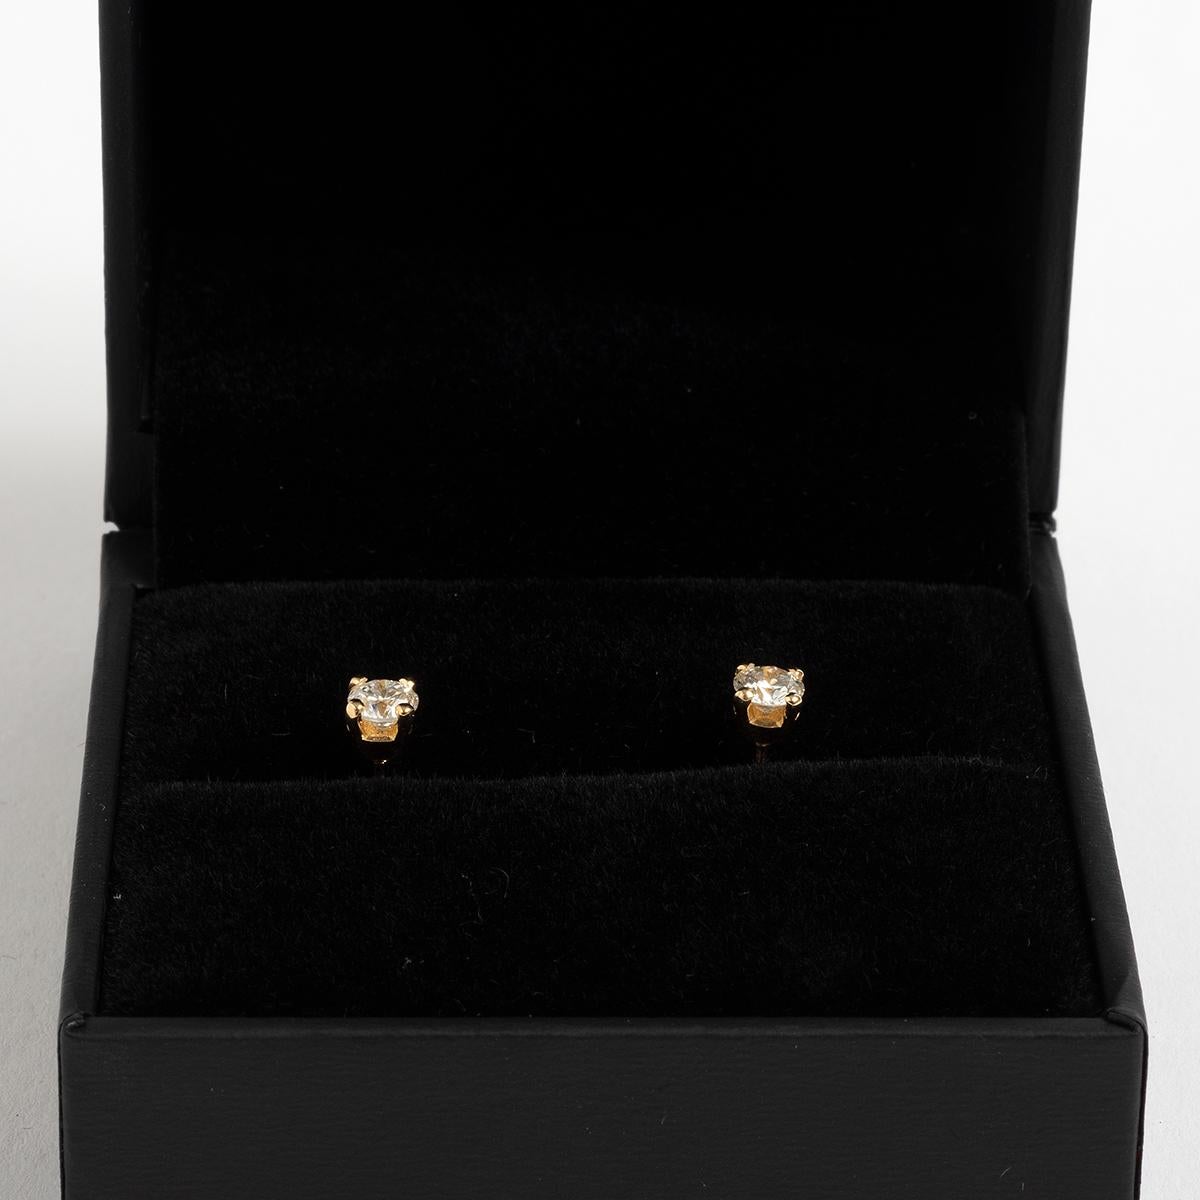 Our classic diamond ear studs in 9k yellow gold feature diamond solitaires of est. .50ct